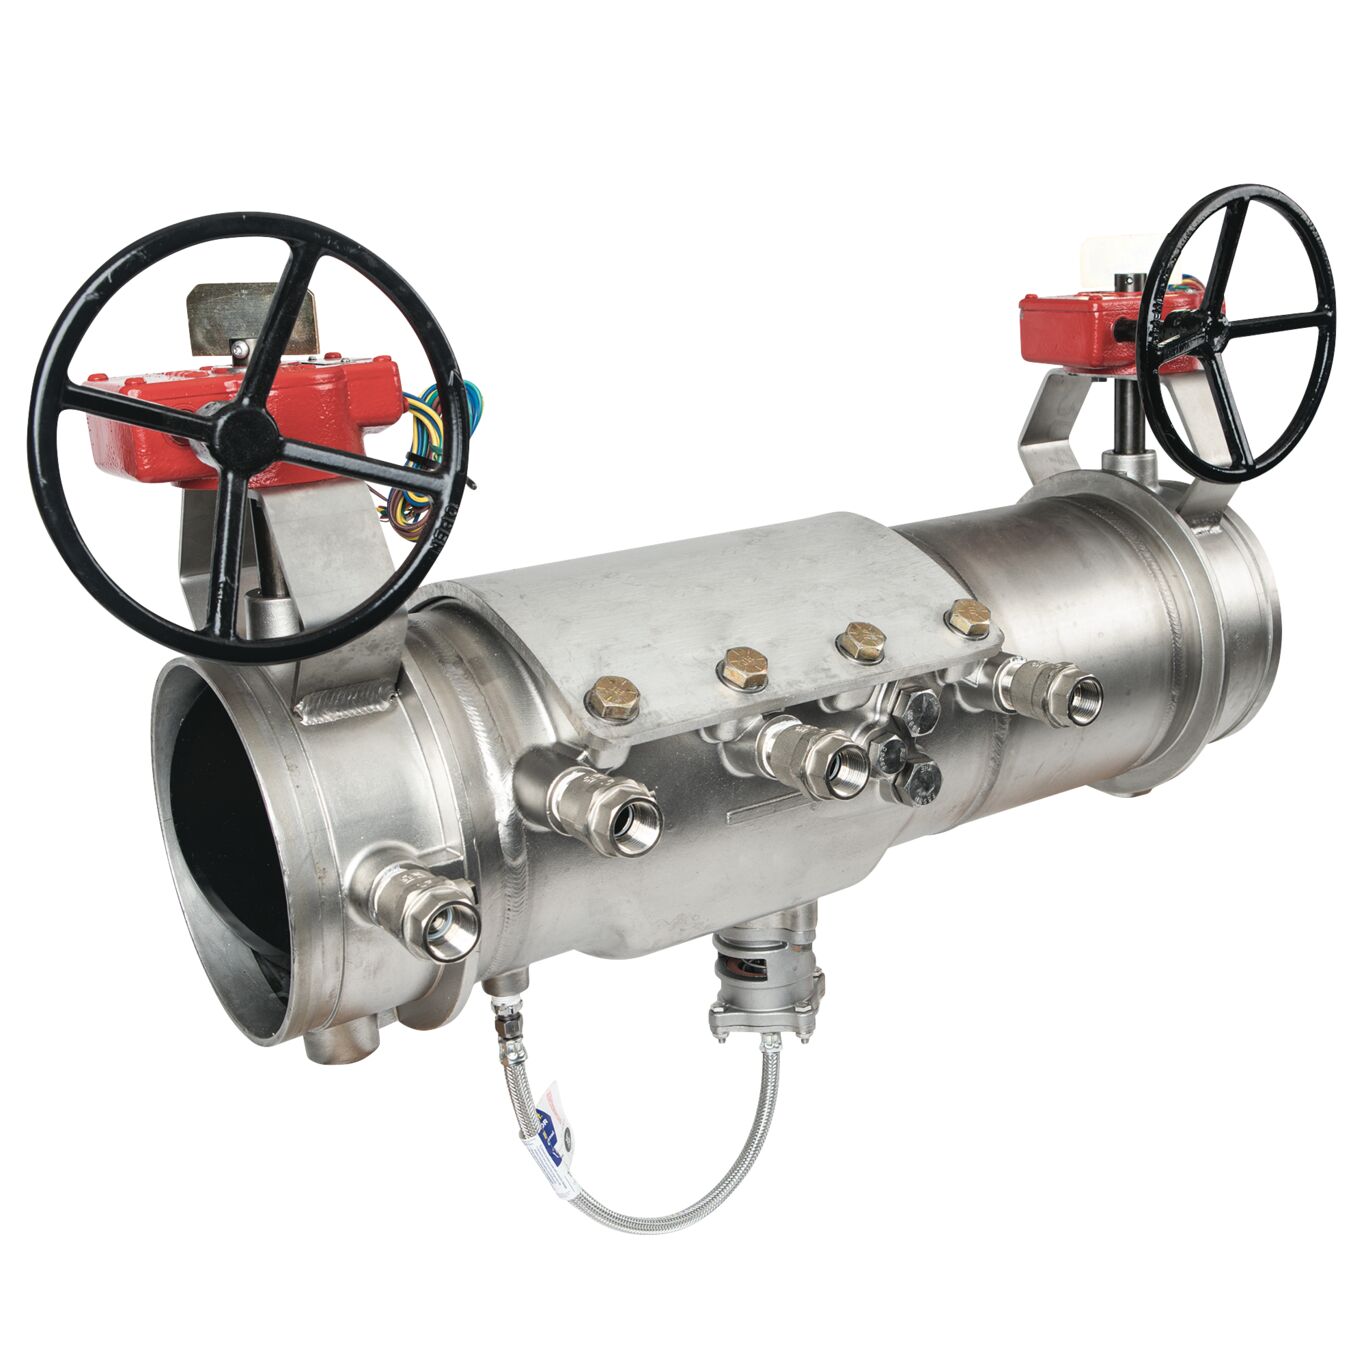 Product Image Stainless Steel Reduced Pressure Zone Backflow Preventer Assembly, Magnum, Integral Butterfly Valves, Grooved End Conn, Dual-Action Check Modules